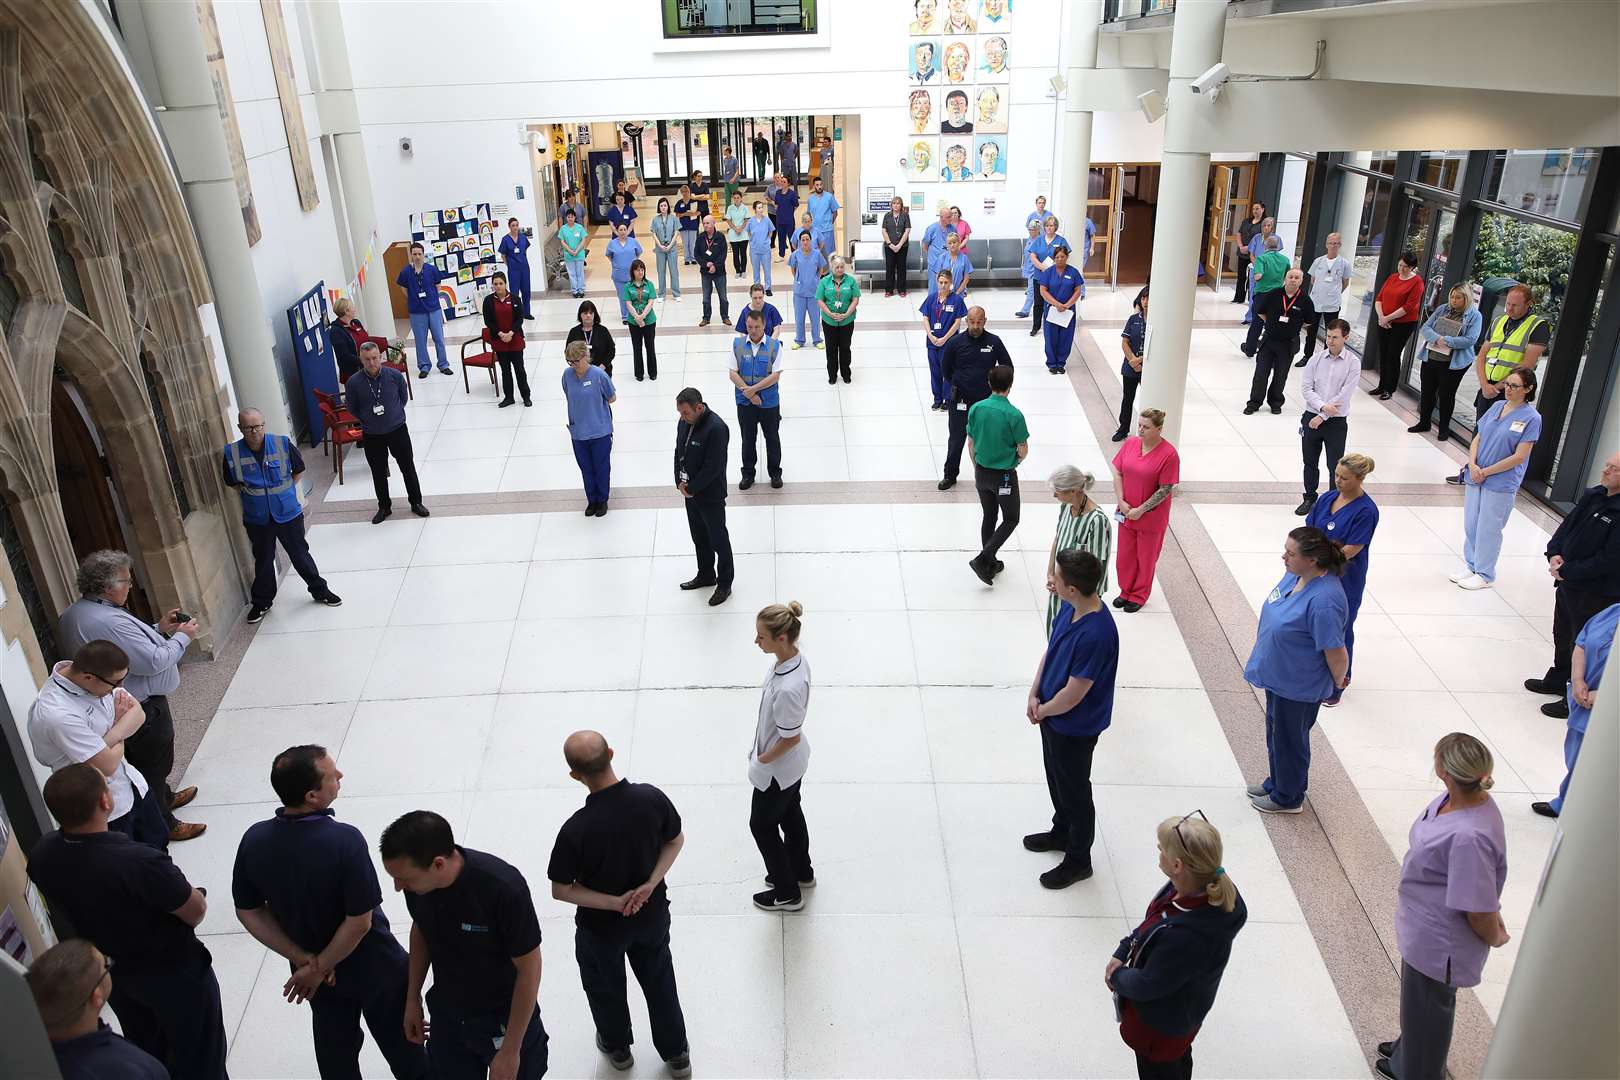 NHS staff at the Mater hospital in Belfast, during a minute’s silence to pay tribute to the NHS staff and key workers who have died during the coronavirus outbreak (Peter Morrison/PA)